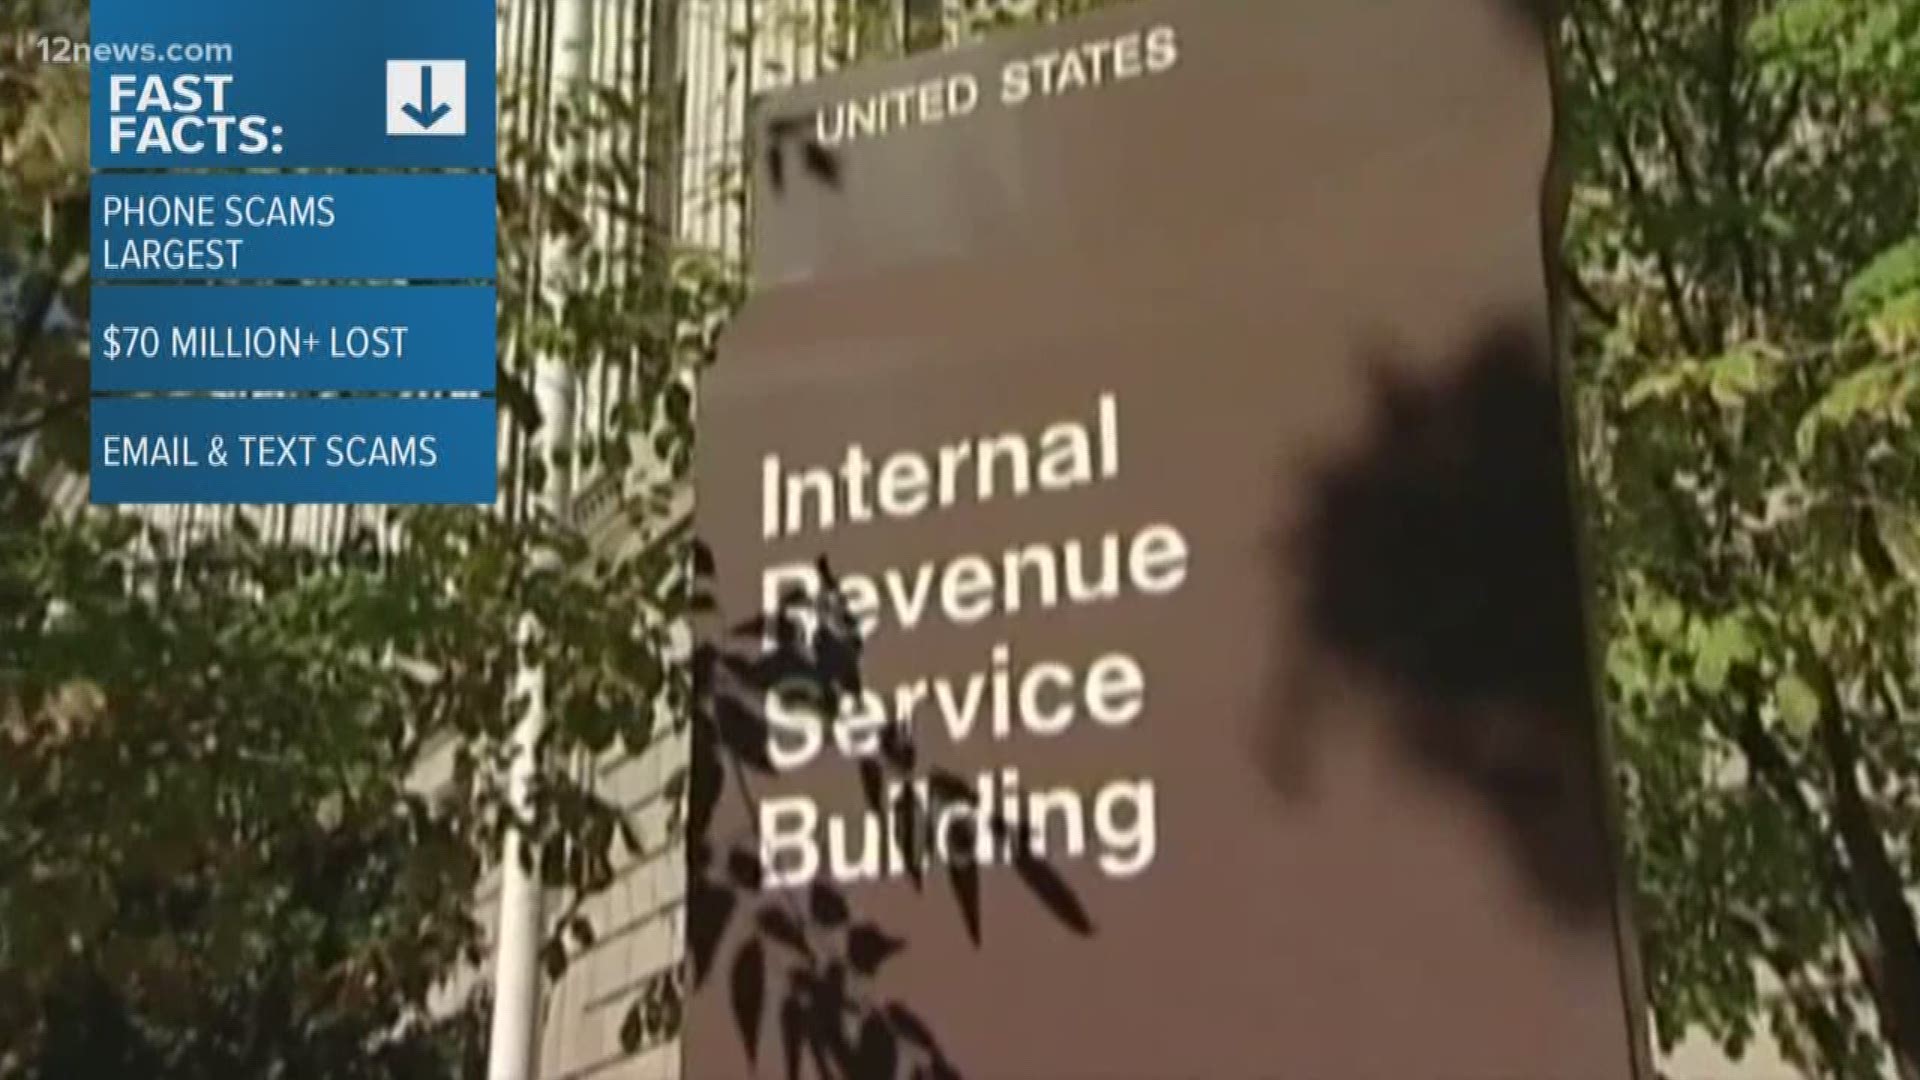 The Internal Revenue Service warns that calls, emails and texts claiming to be from the IRS about taxes due are scams.